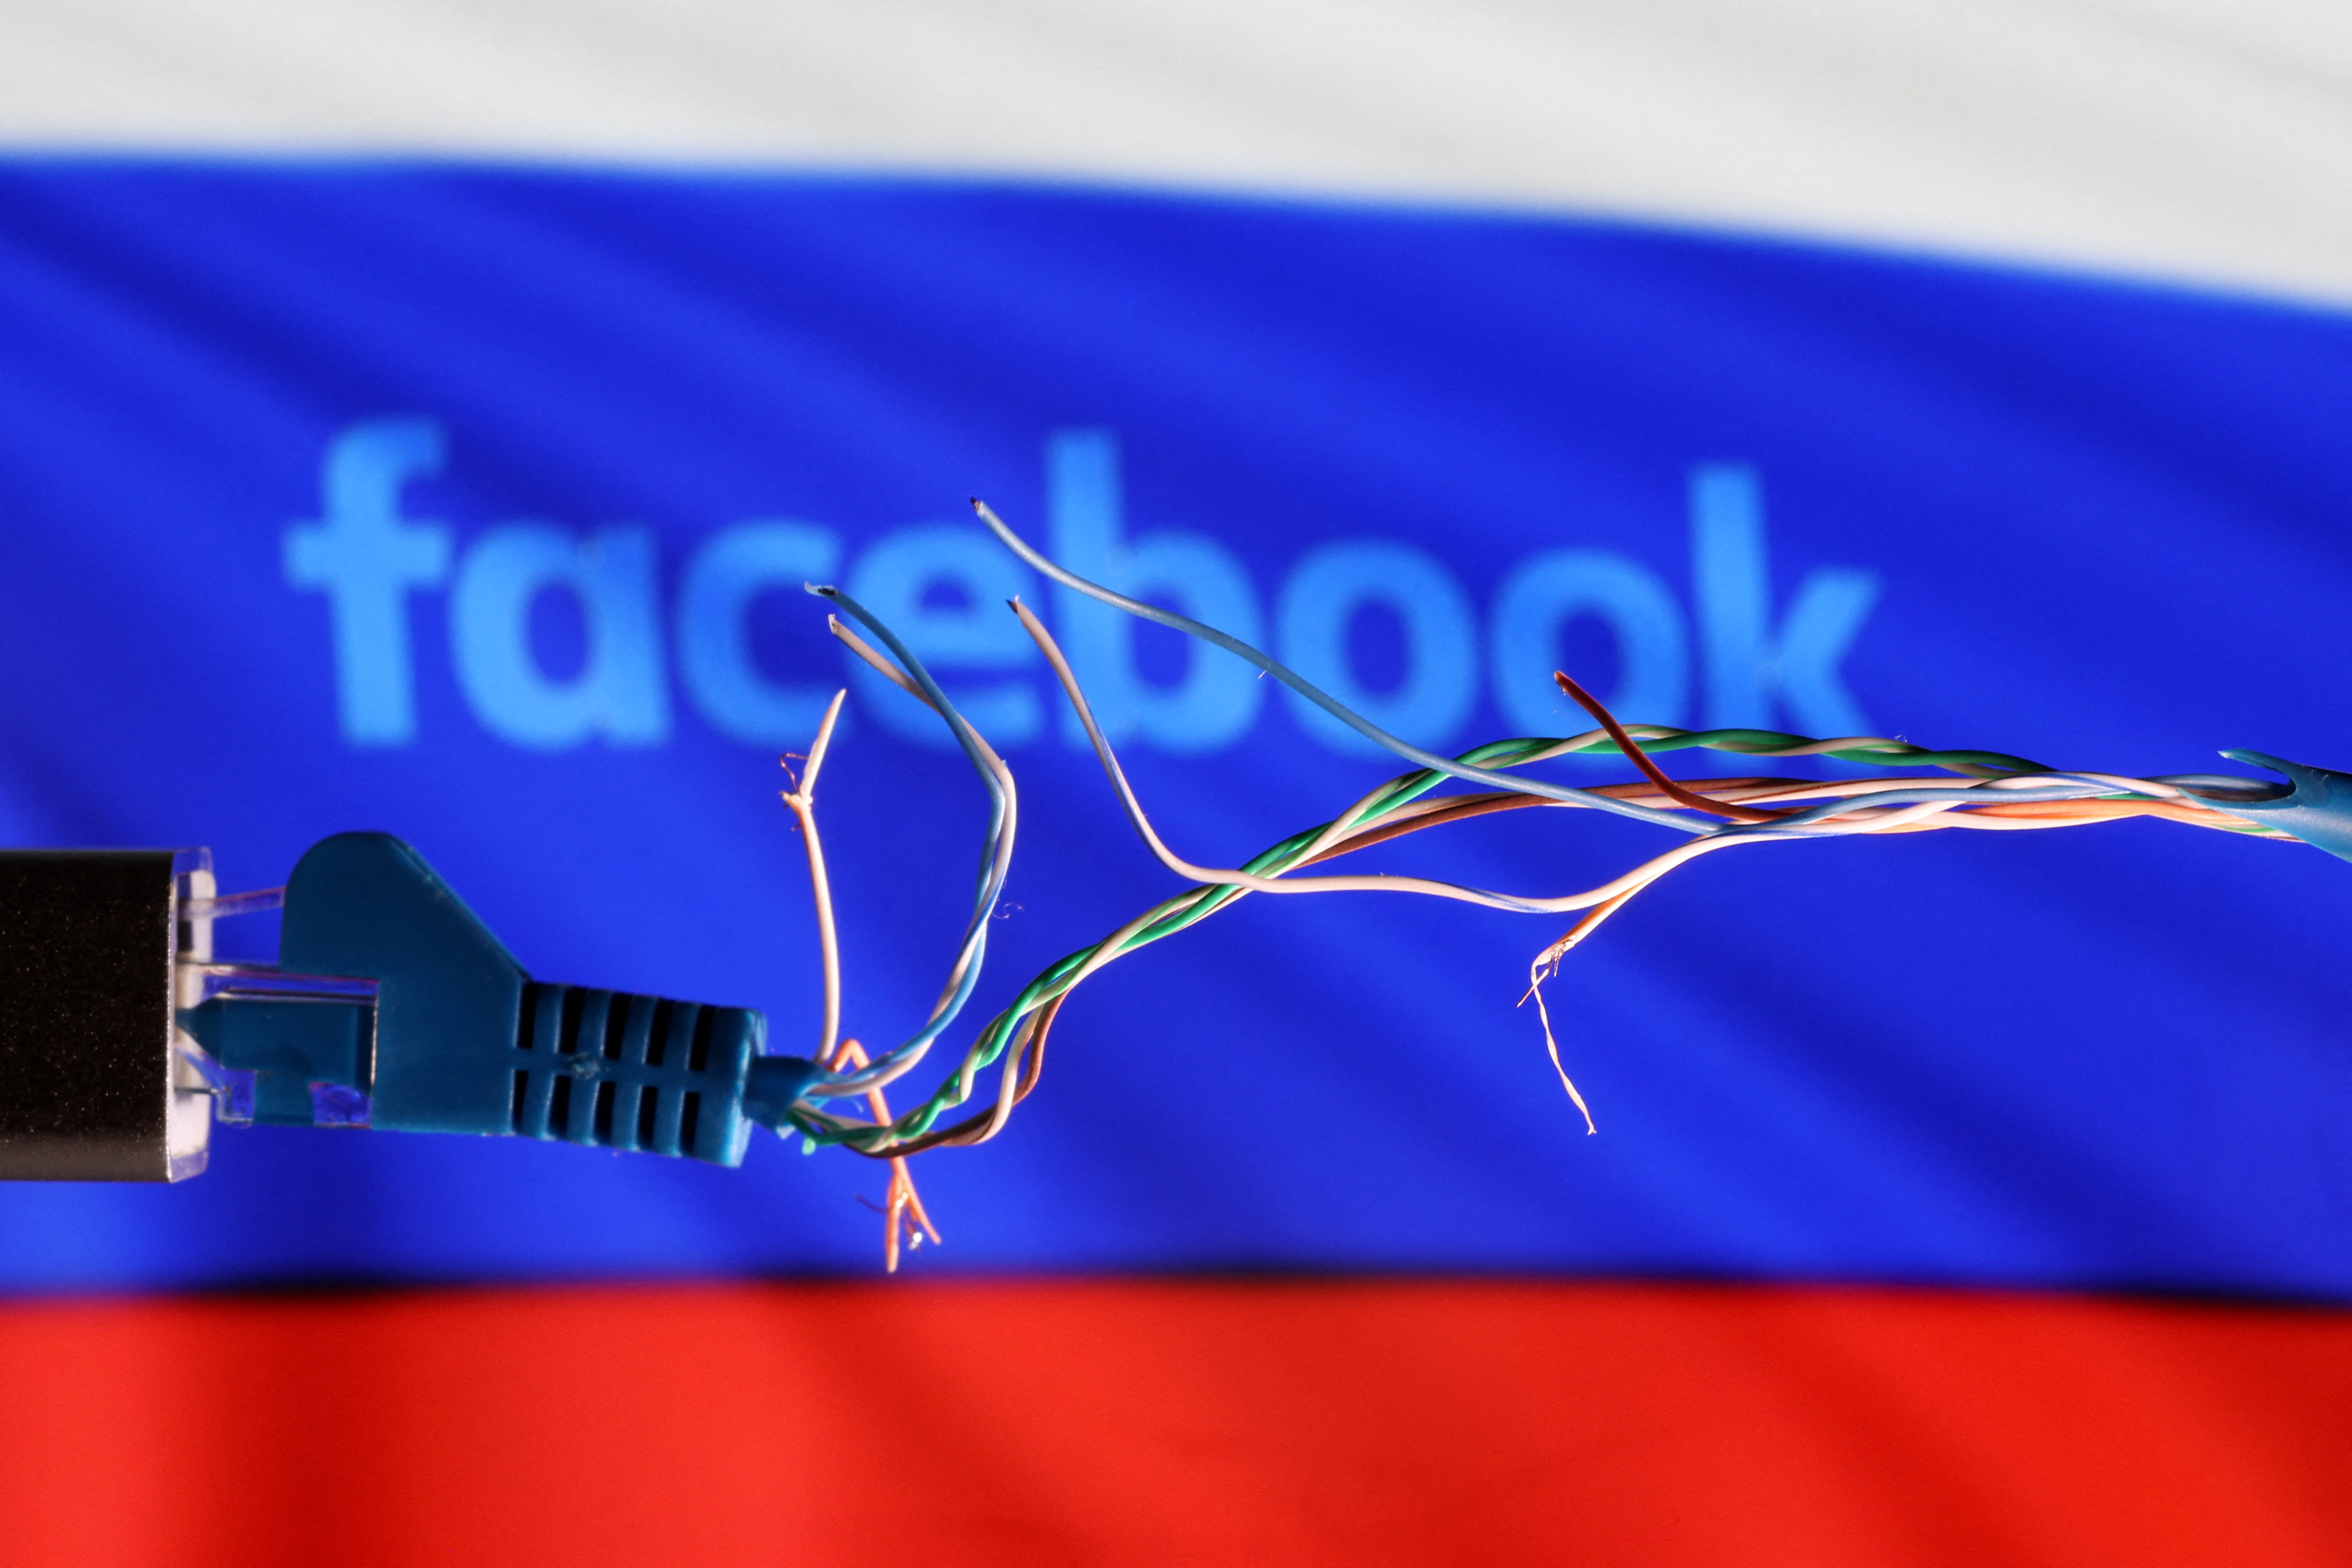 image Facebook owner defends policy on calls for violence that angered Russia